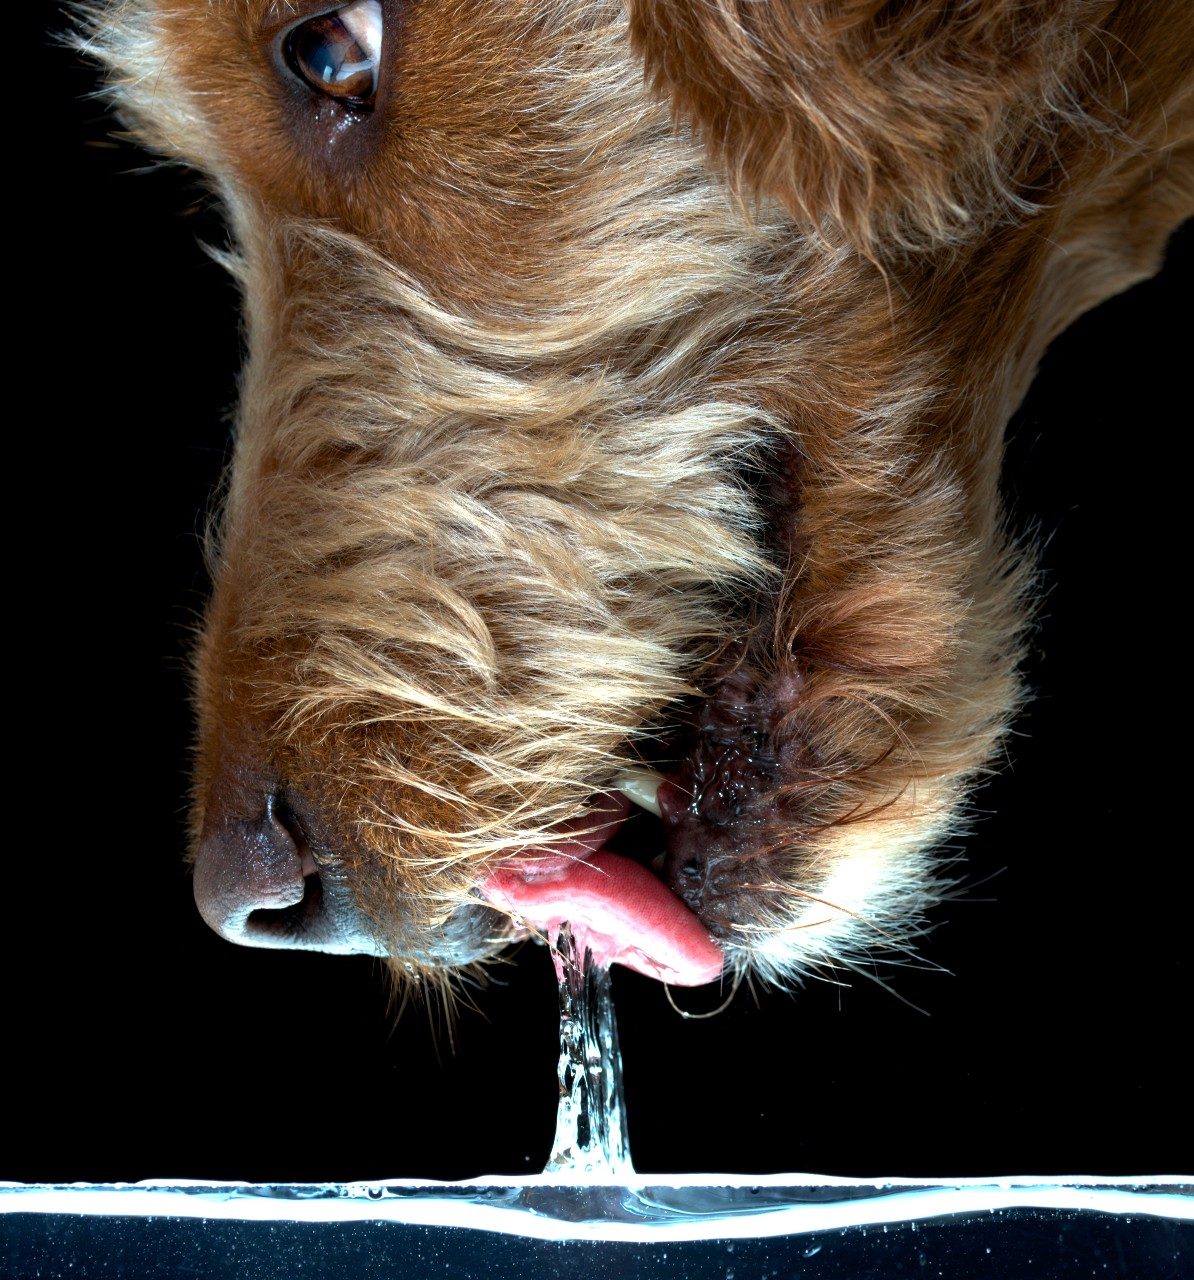 Virginia Tech researchers Jake Socha, Sean Gart, and Sunghwan "Sunny" Jung captured this photo of dog-lapping in action. A column of water follows the dog's accelerating tongue into its mouth.